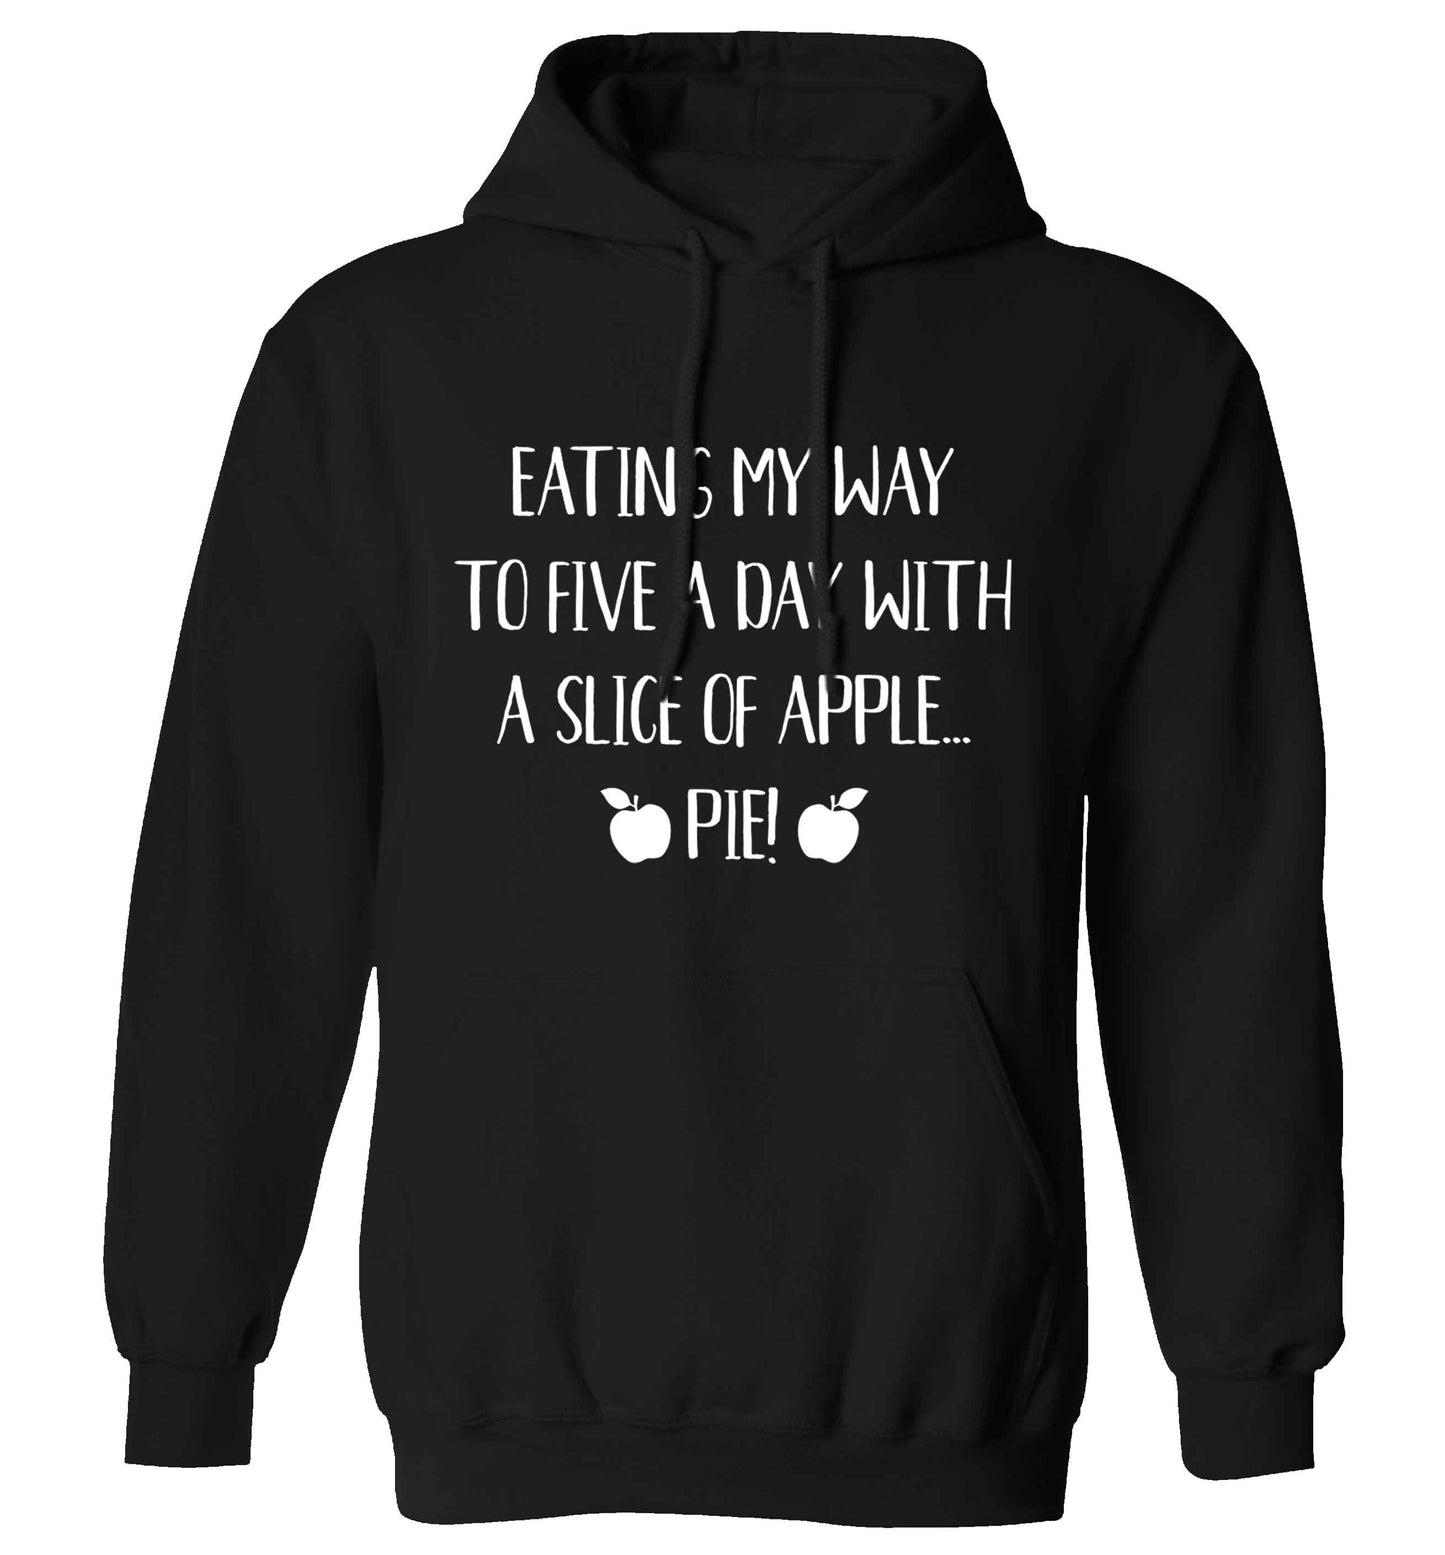 Eating my way to five a day with a slice of apple pie adults unisex black hoodie 2XL